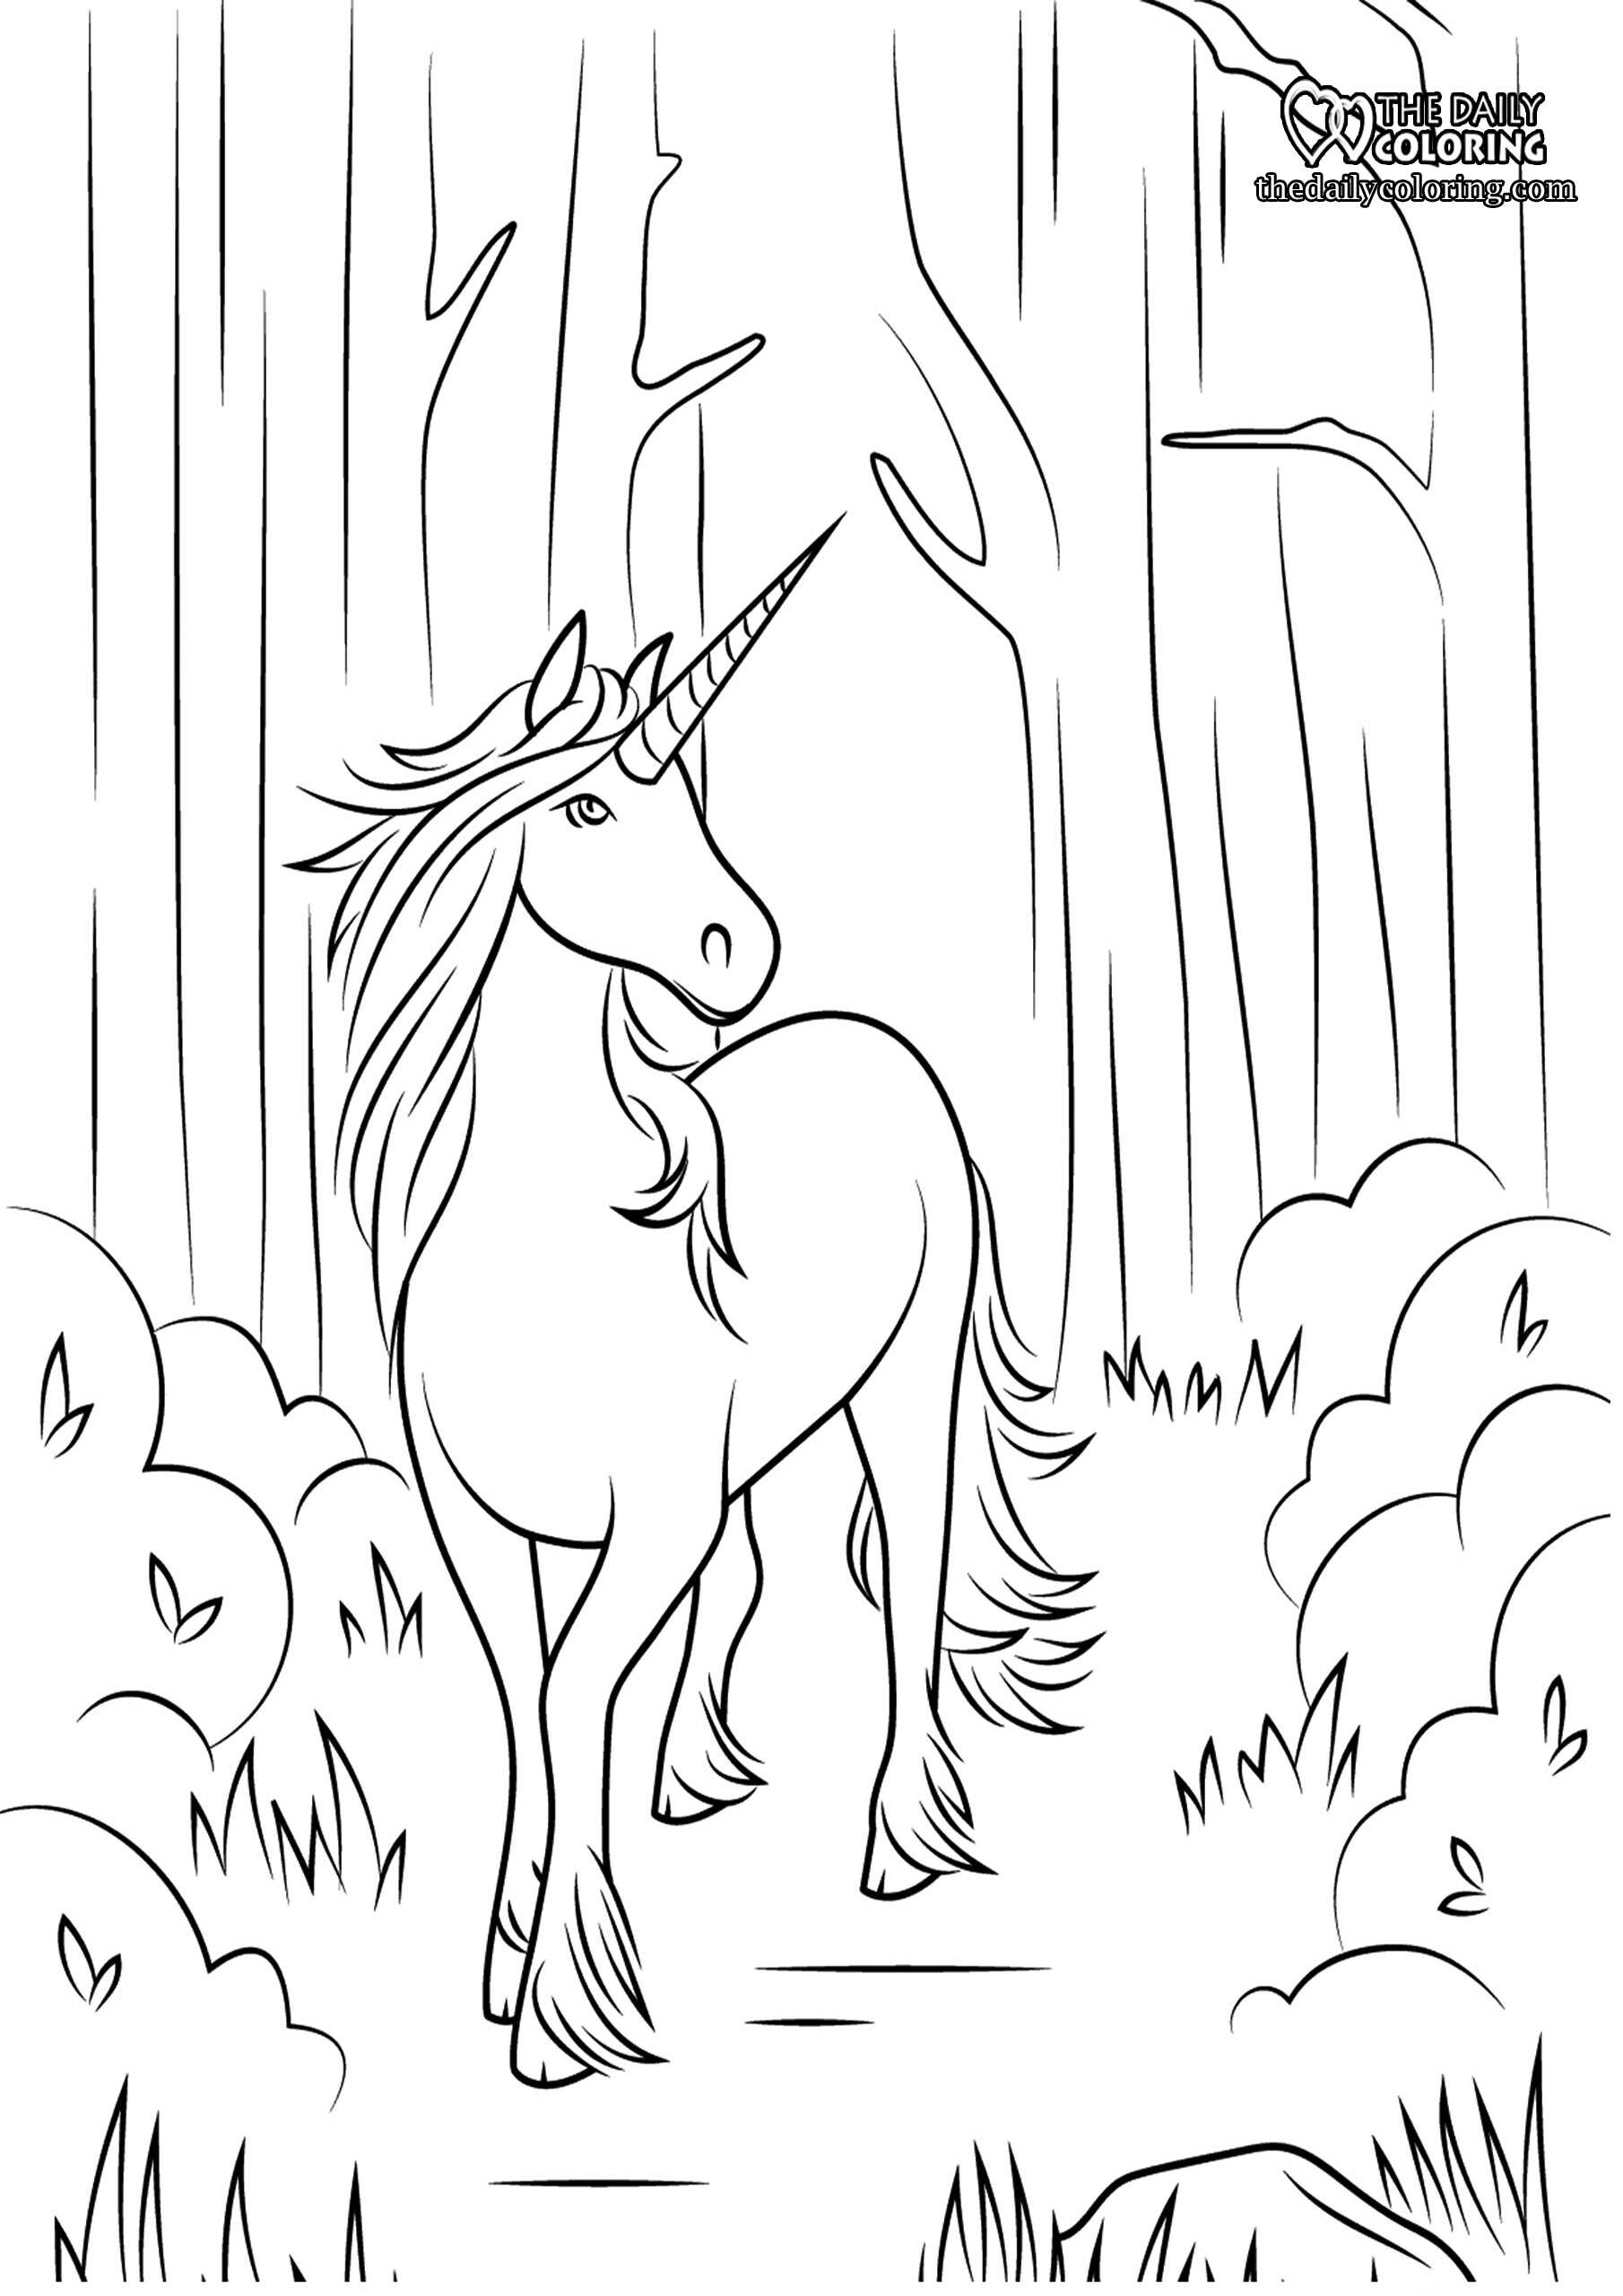 Unicorn Coloring Pages   The Daily Coloring